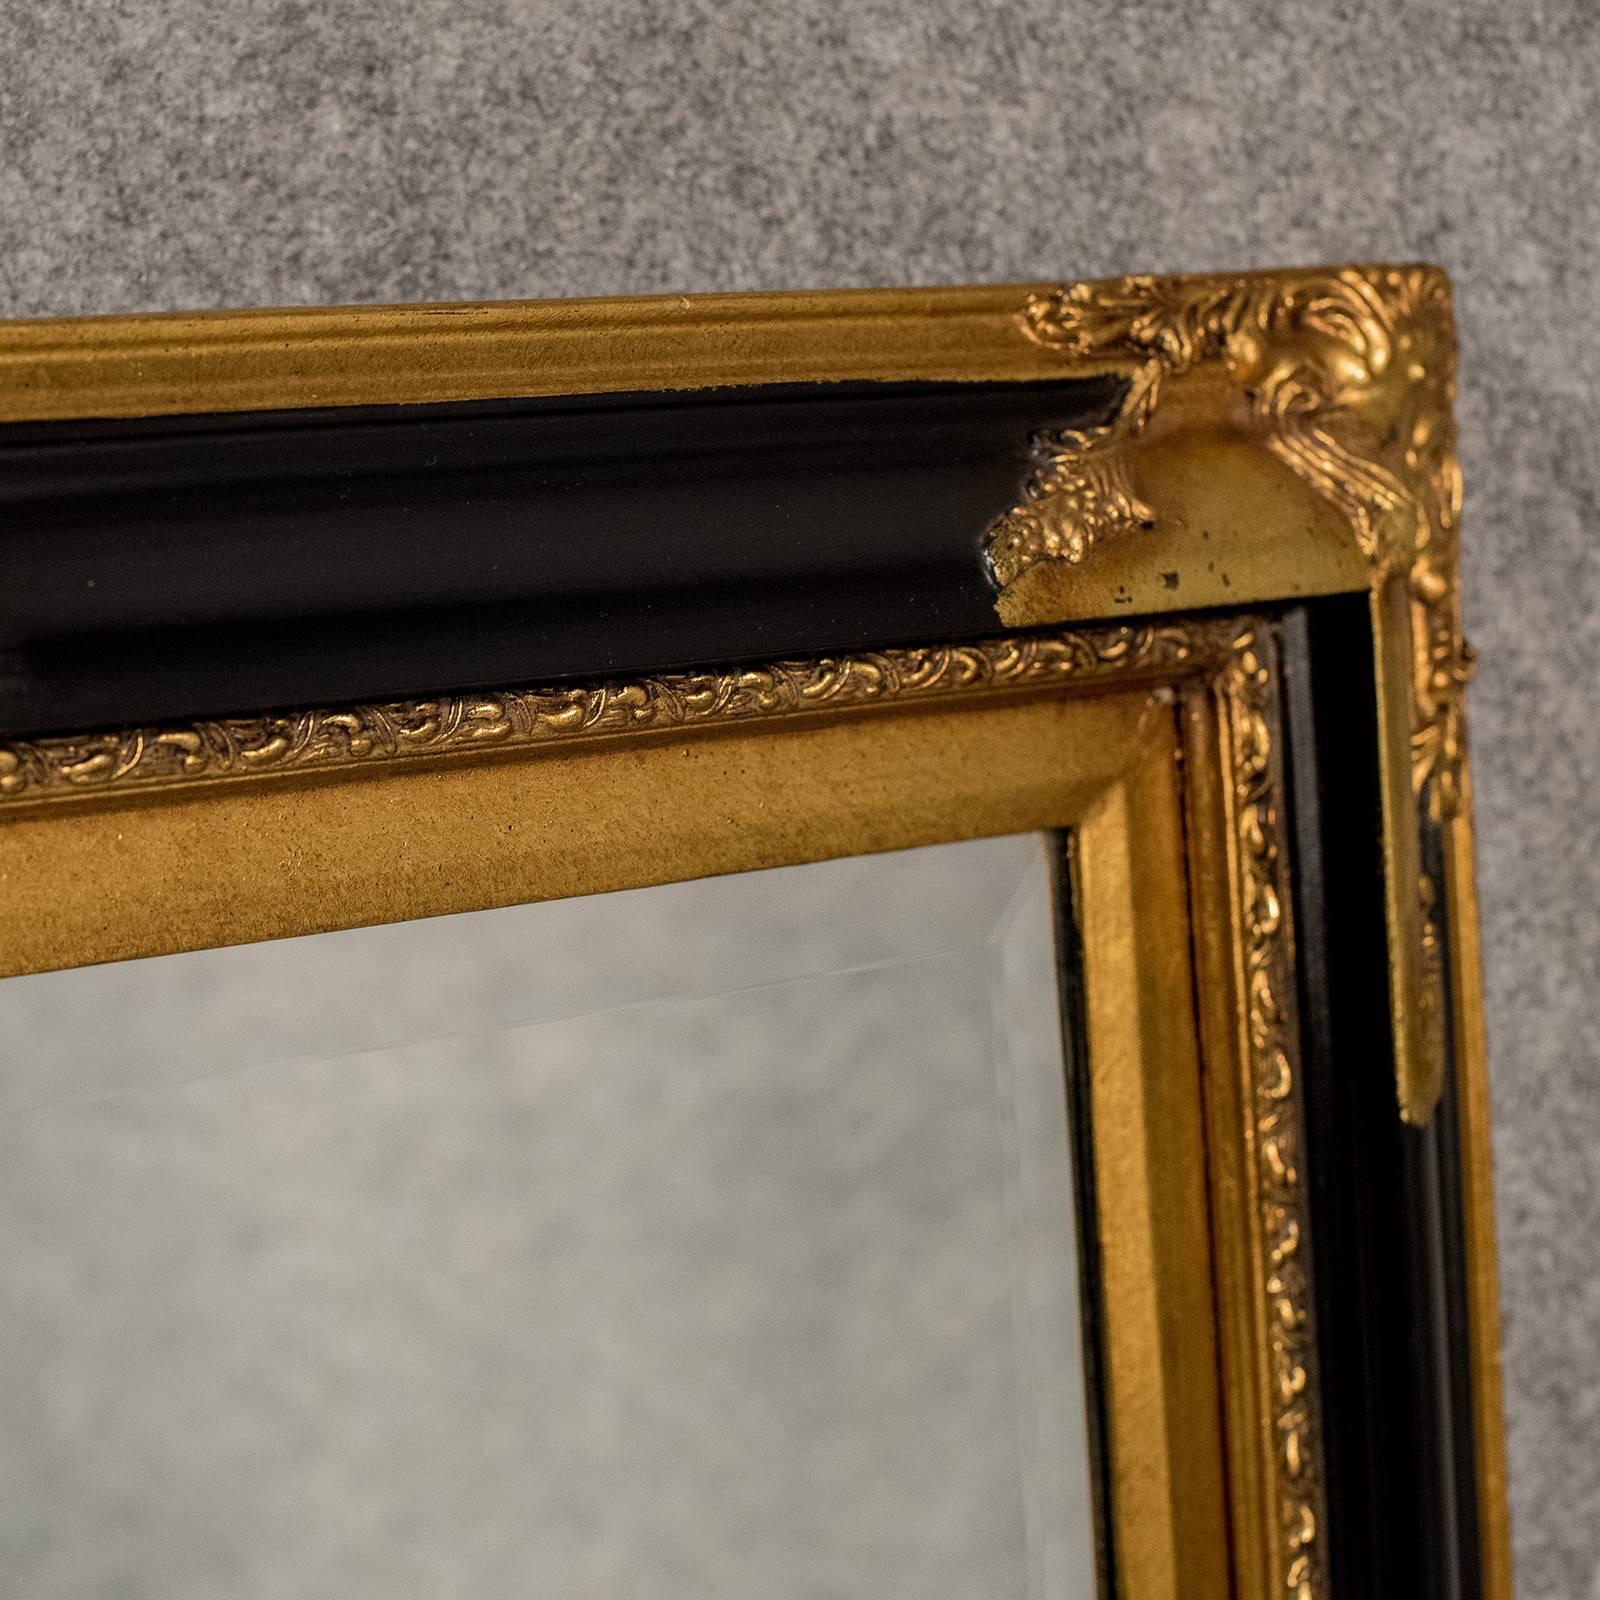 Great Britain (UK) Bevelled Quality Antique Style Wall Mirror Overmantle Gilt Ornate Frame